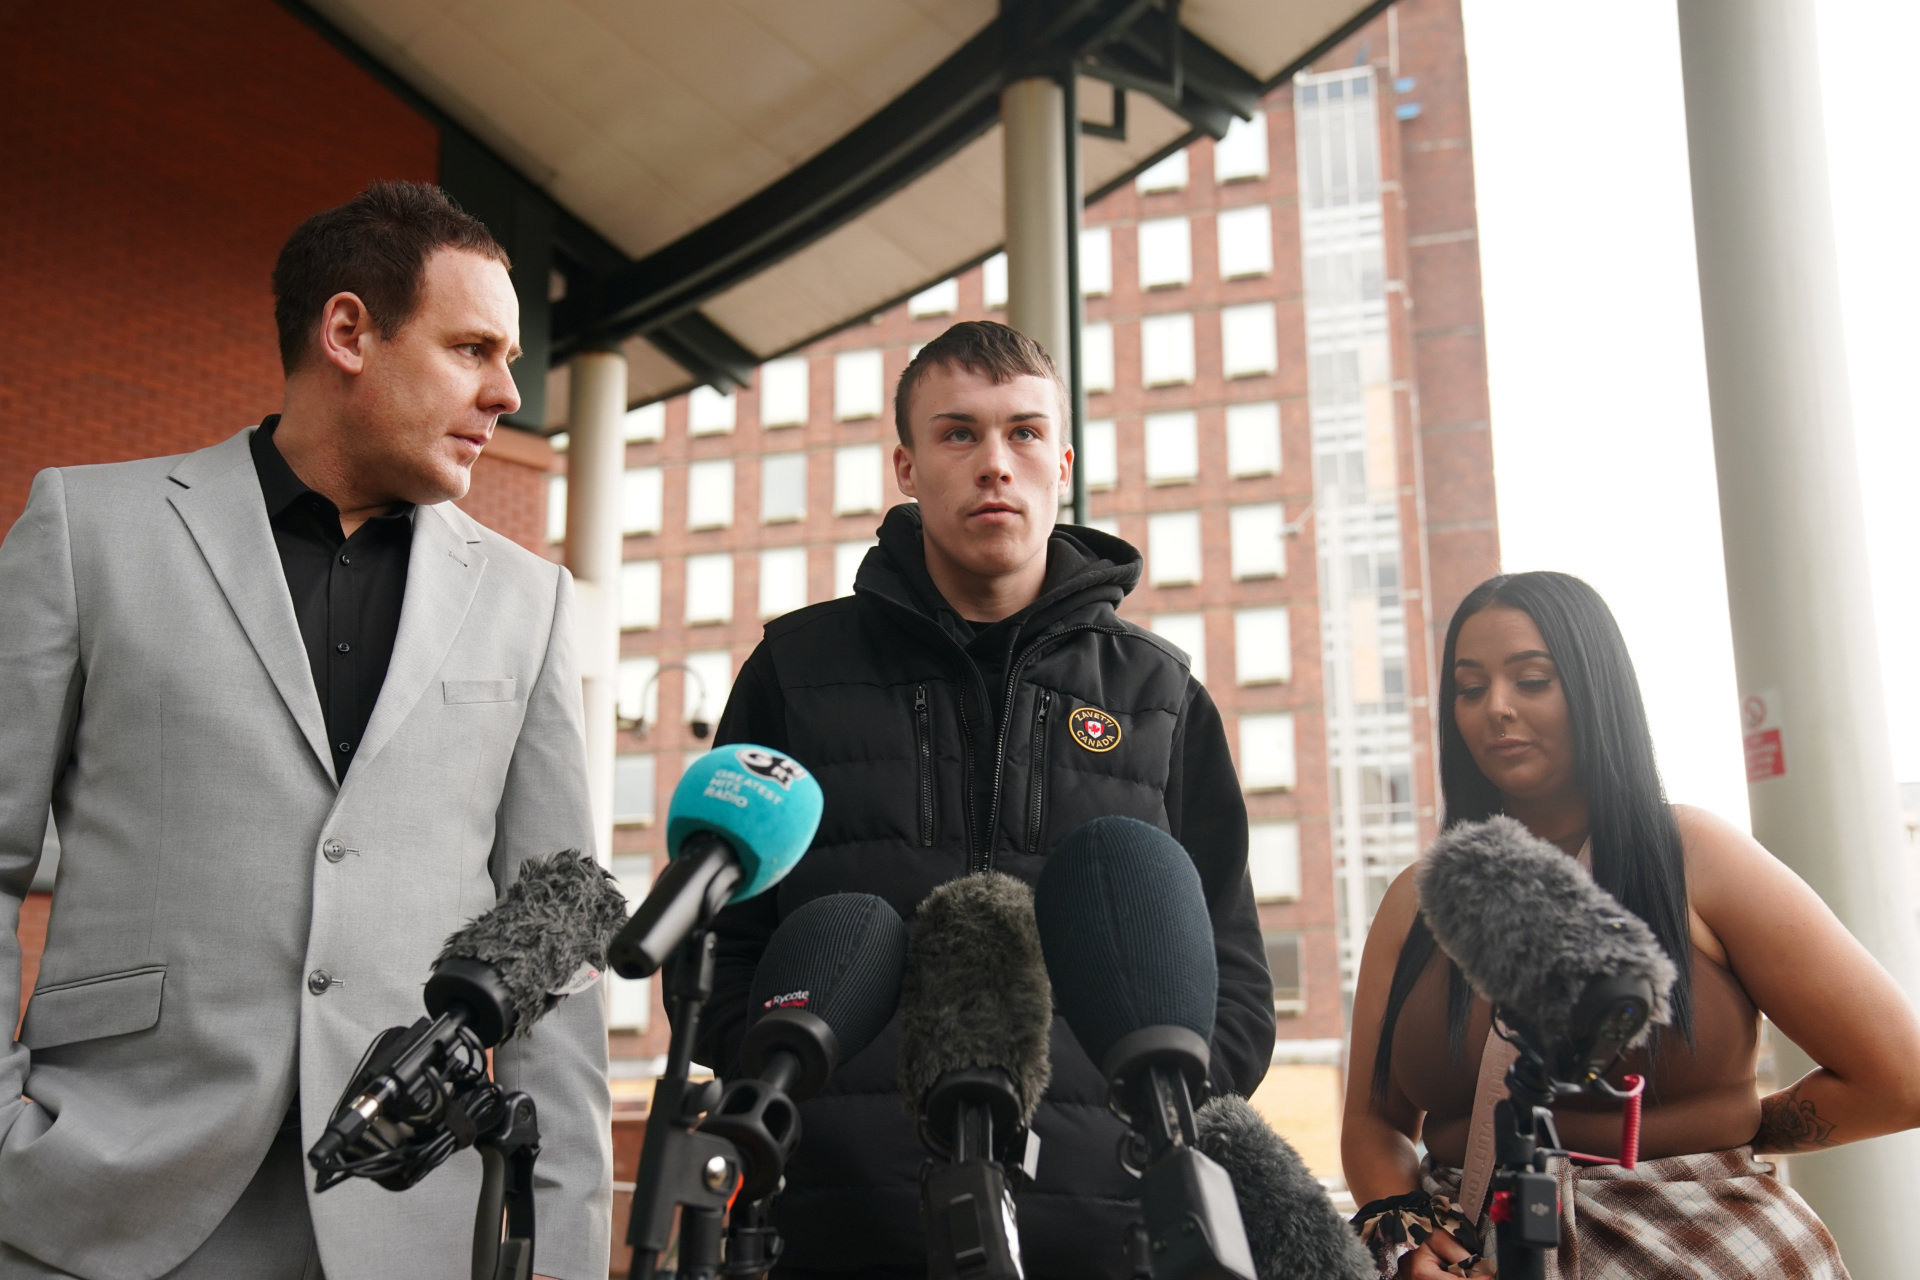 Jordan Trengove (centre), who was accused of trafficking by Eleanor Williams, speaking to the media outside Preston Crown Court, Lancashire, where she was jailed for eight-and-a-half years for nine counts of perverting the course of justice after she claimed to have been the victim of an Asian grooming gang. Williams, 22, published pictures of her injuries and an account of being groomed, trafficked and beaten, on Facebook in May 2020, in a post which was shared more than 100,000 times. Picture date: Tuesday March 14, 2023. (Photo by Peter Byrne/PA Images via Getty Images)